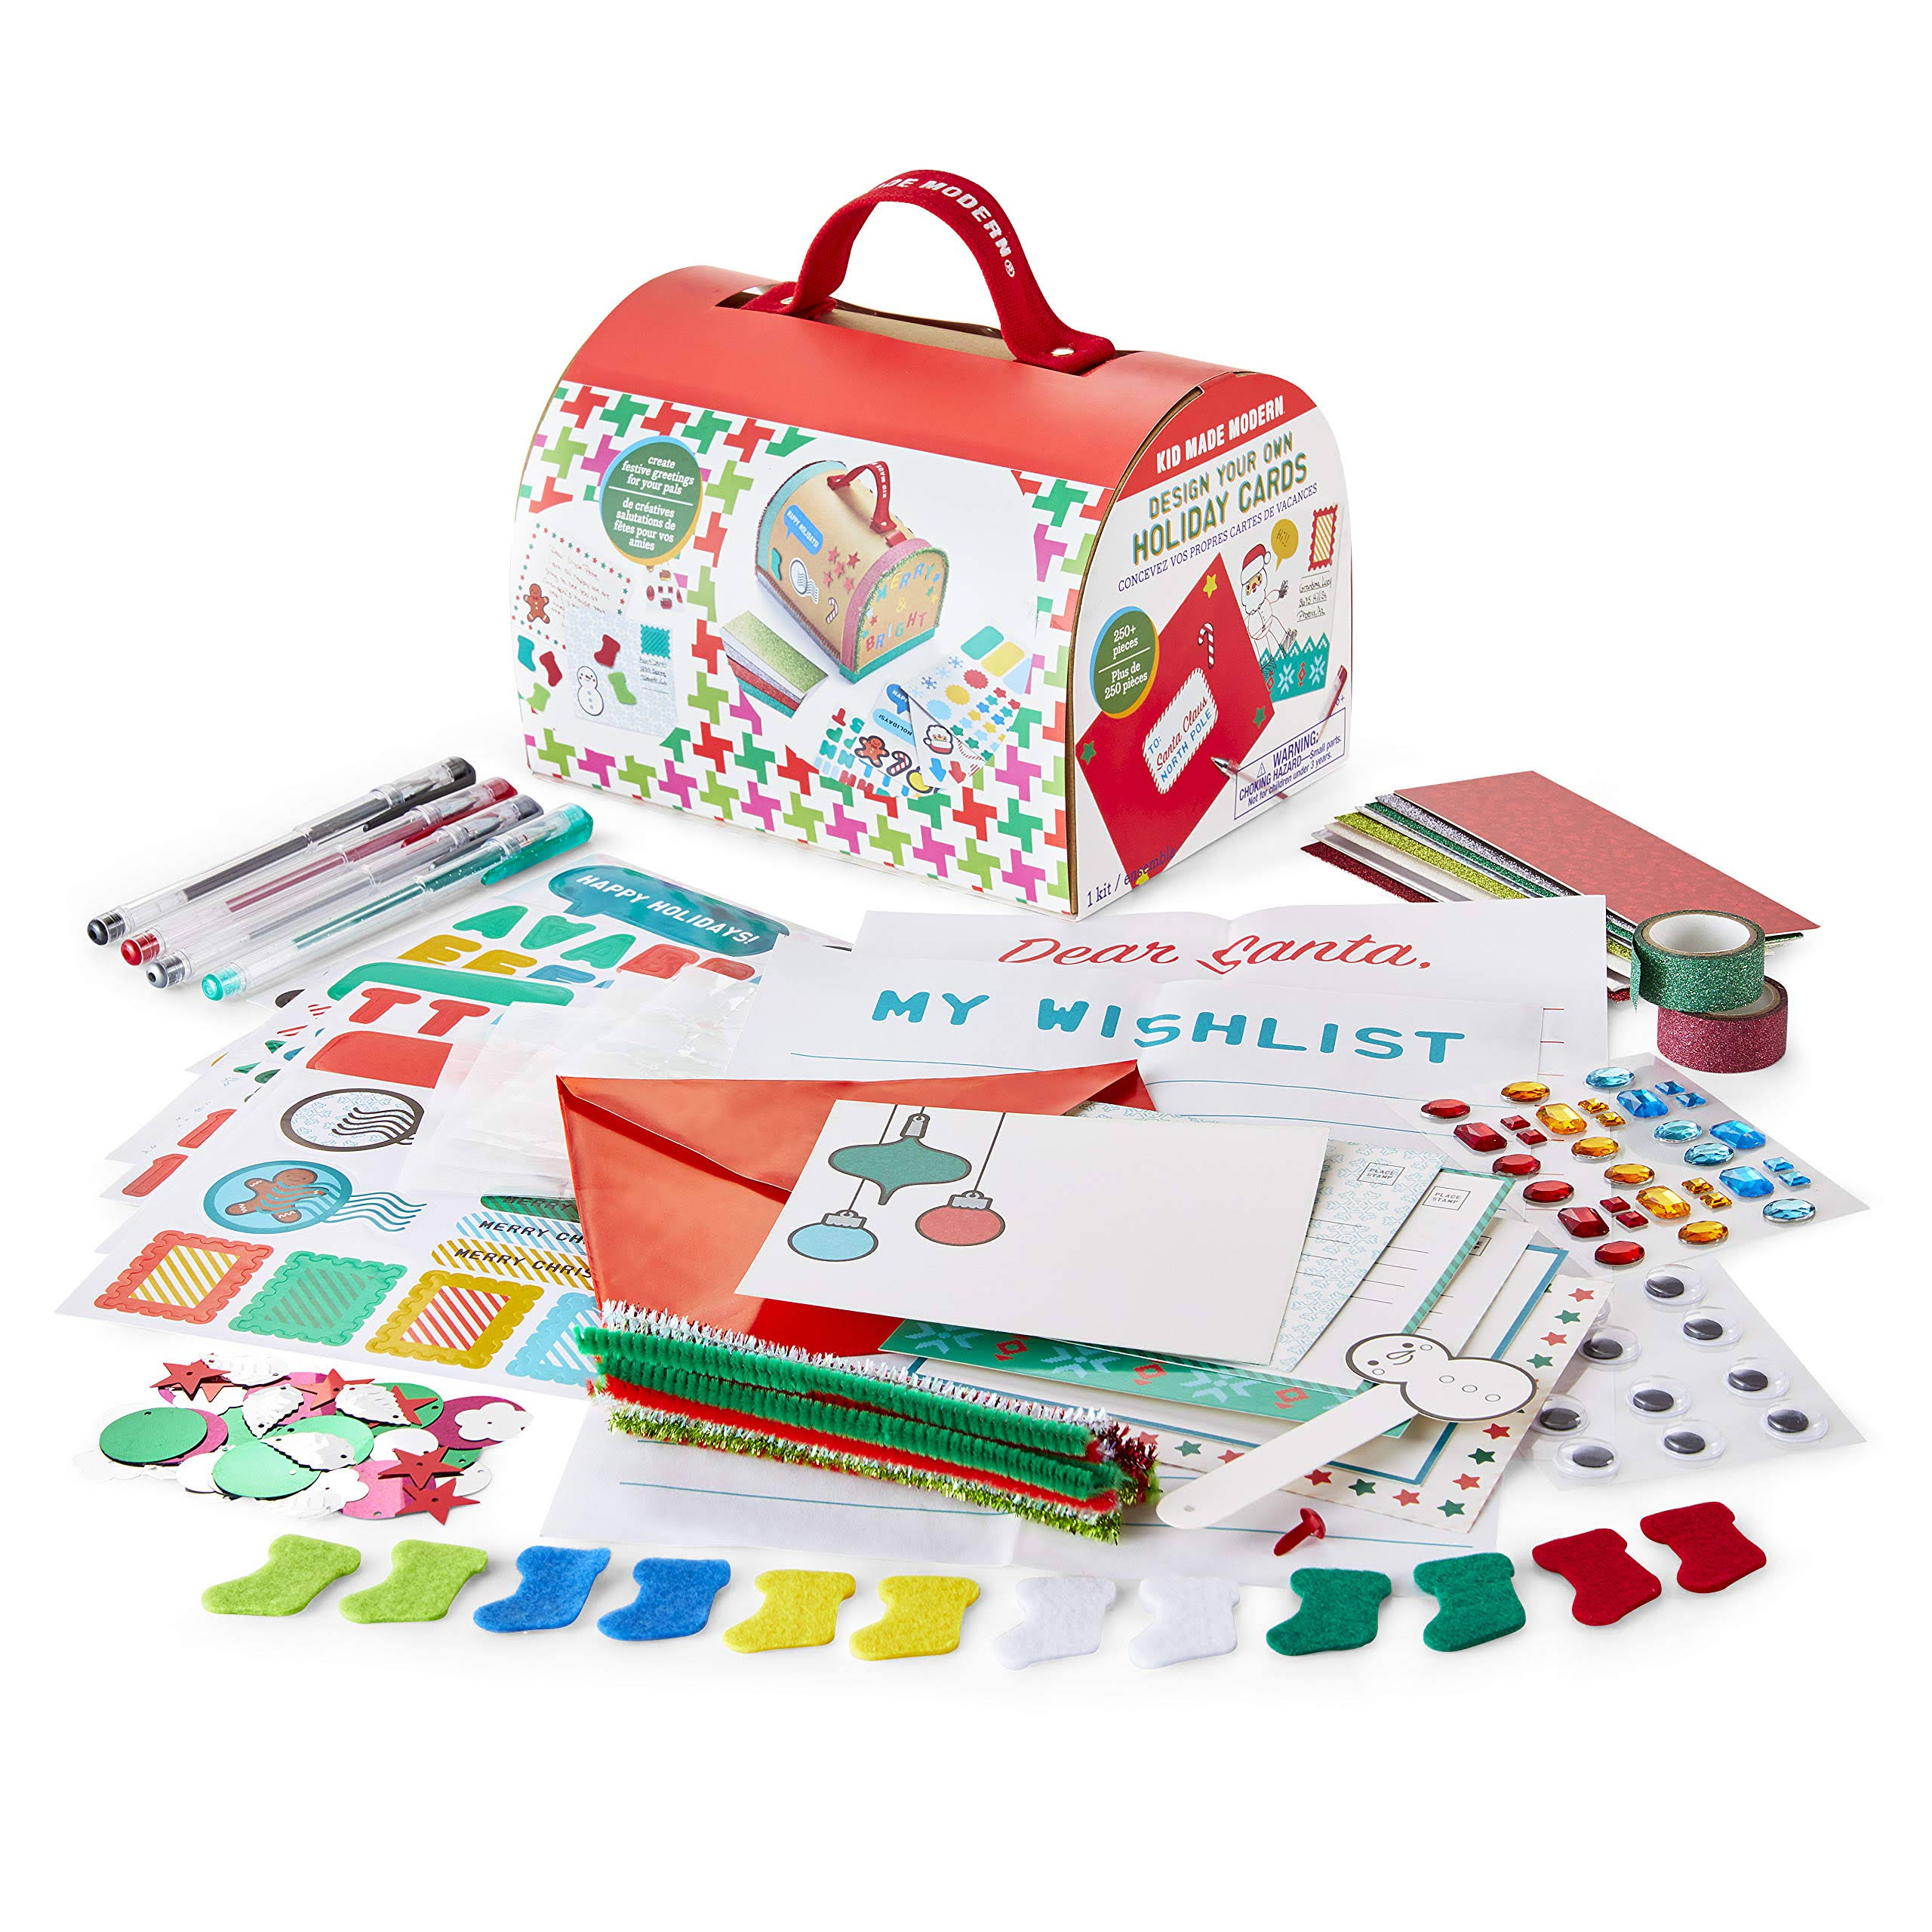 Kid Made Modern Design Your Own Holiday Cards Craft Kit